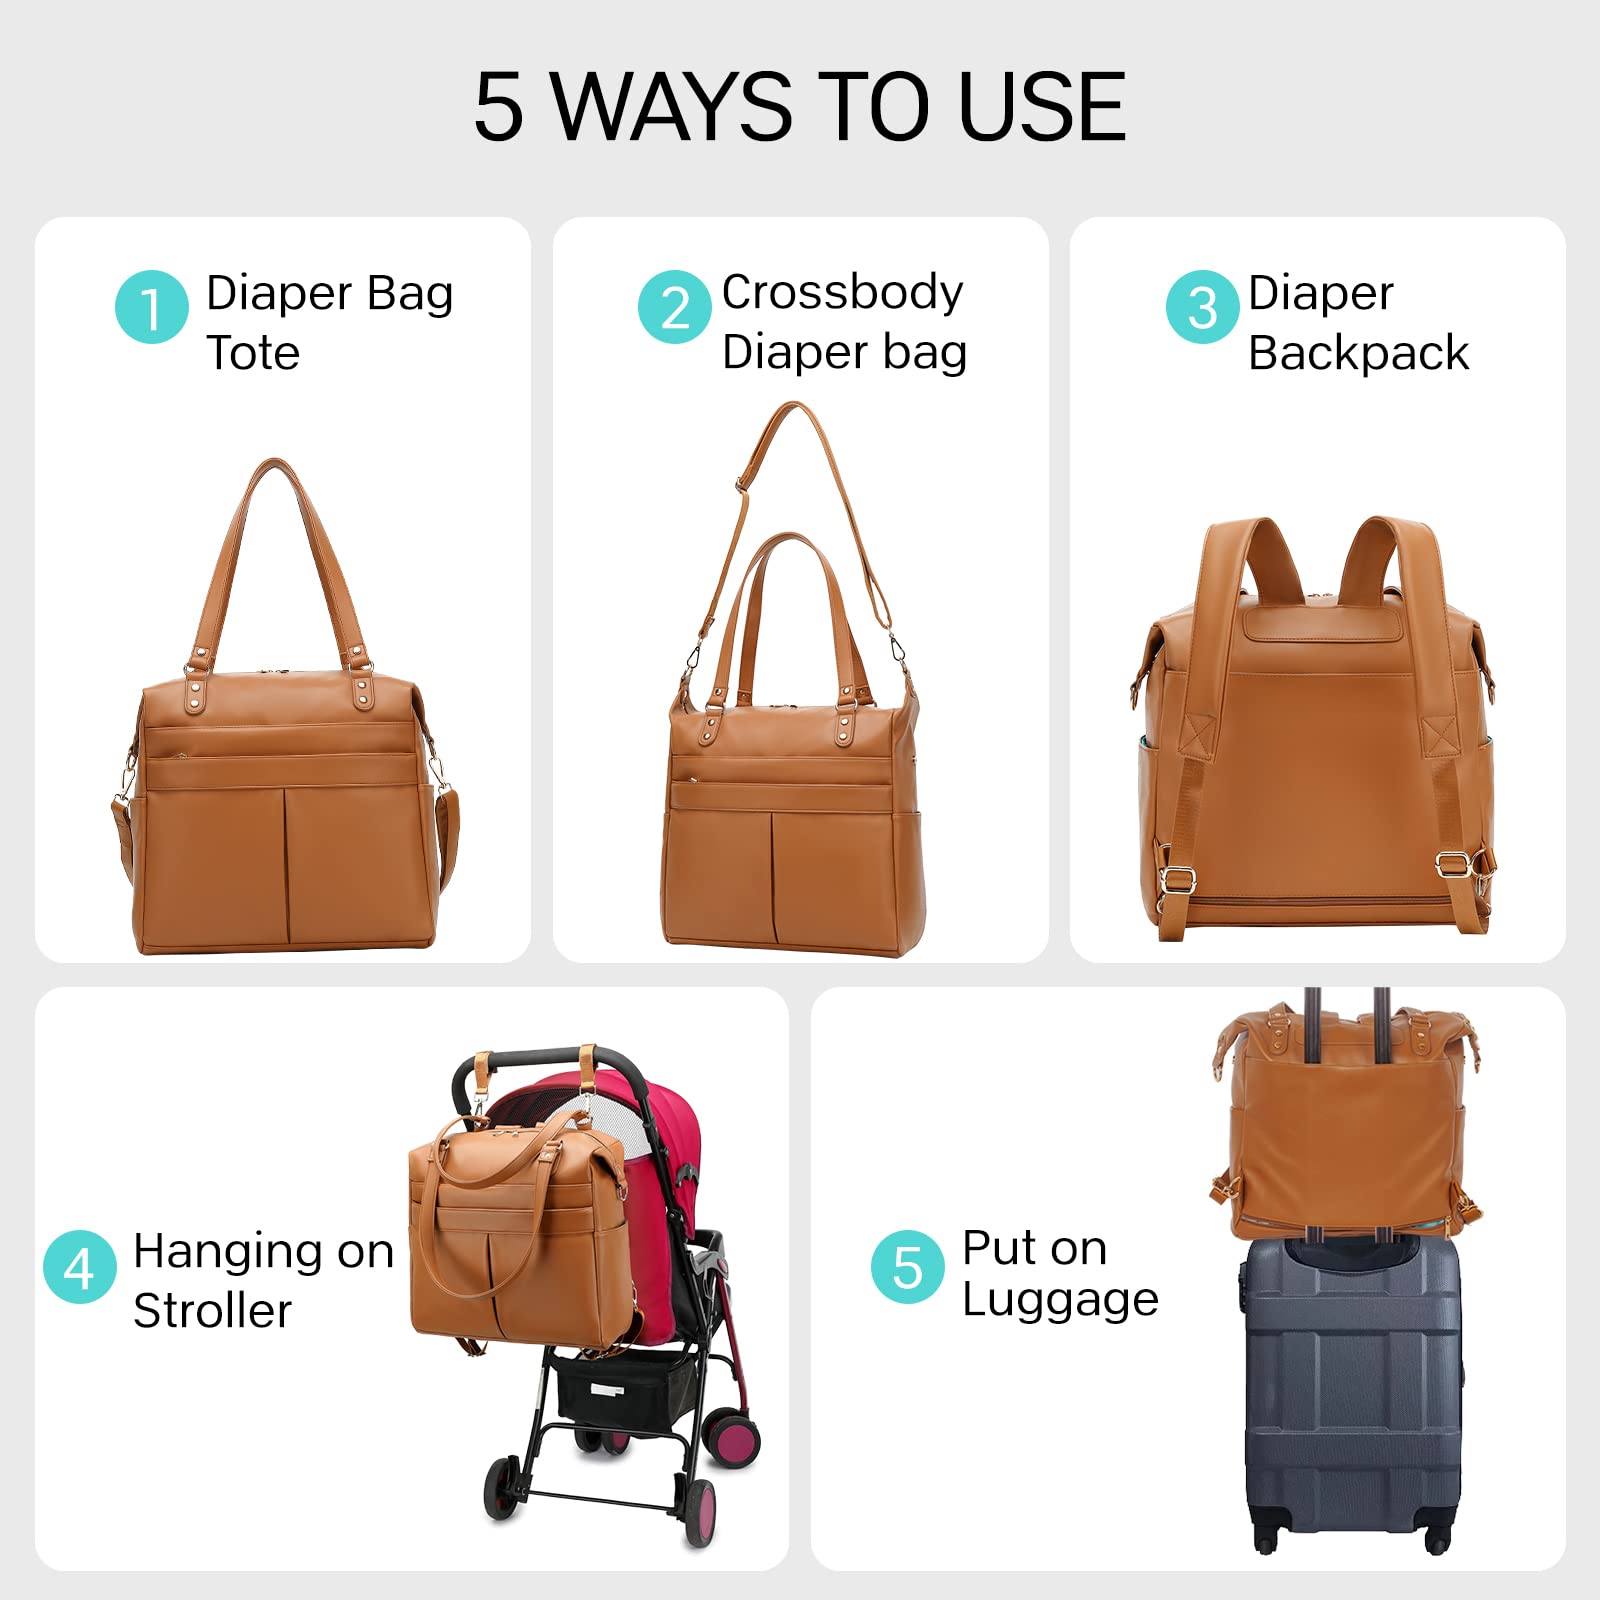 Beaulyn Leather Diaper Bag Backpack, 5-in-1 Travel Back Pack Tote with Changing Pad Large Capacity